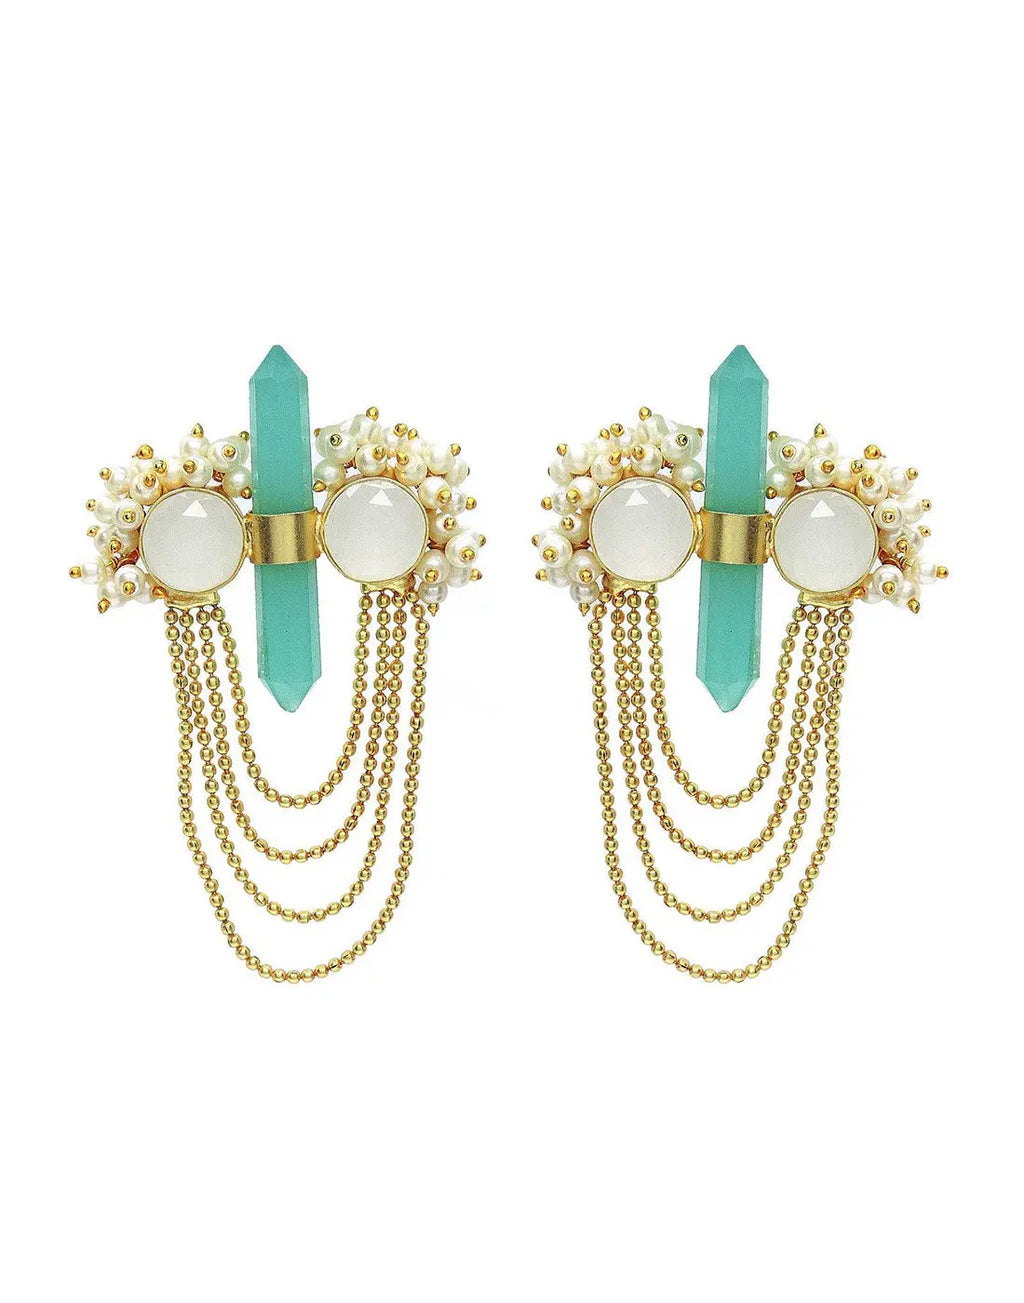 Catalina Earrings- Handcrafted Jewellery from Dori